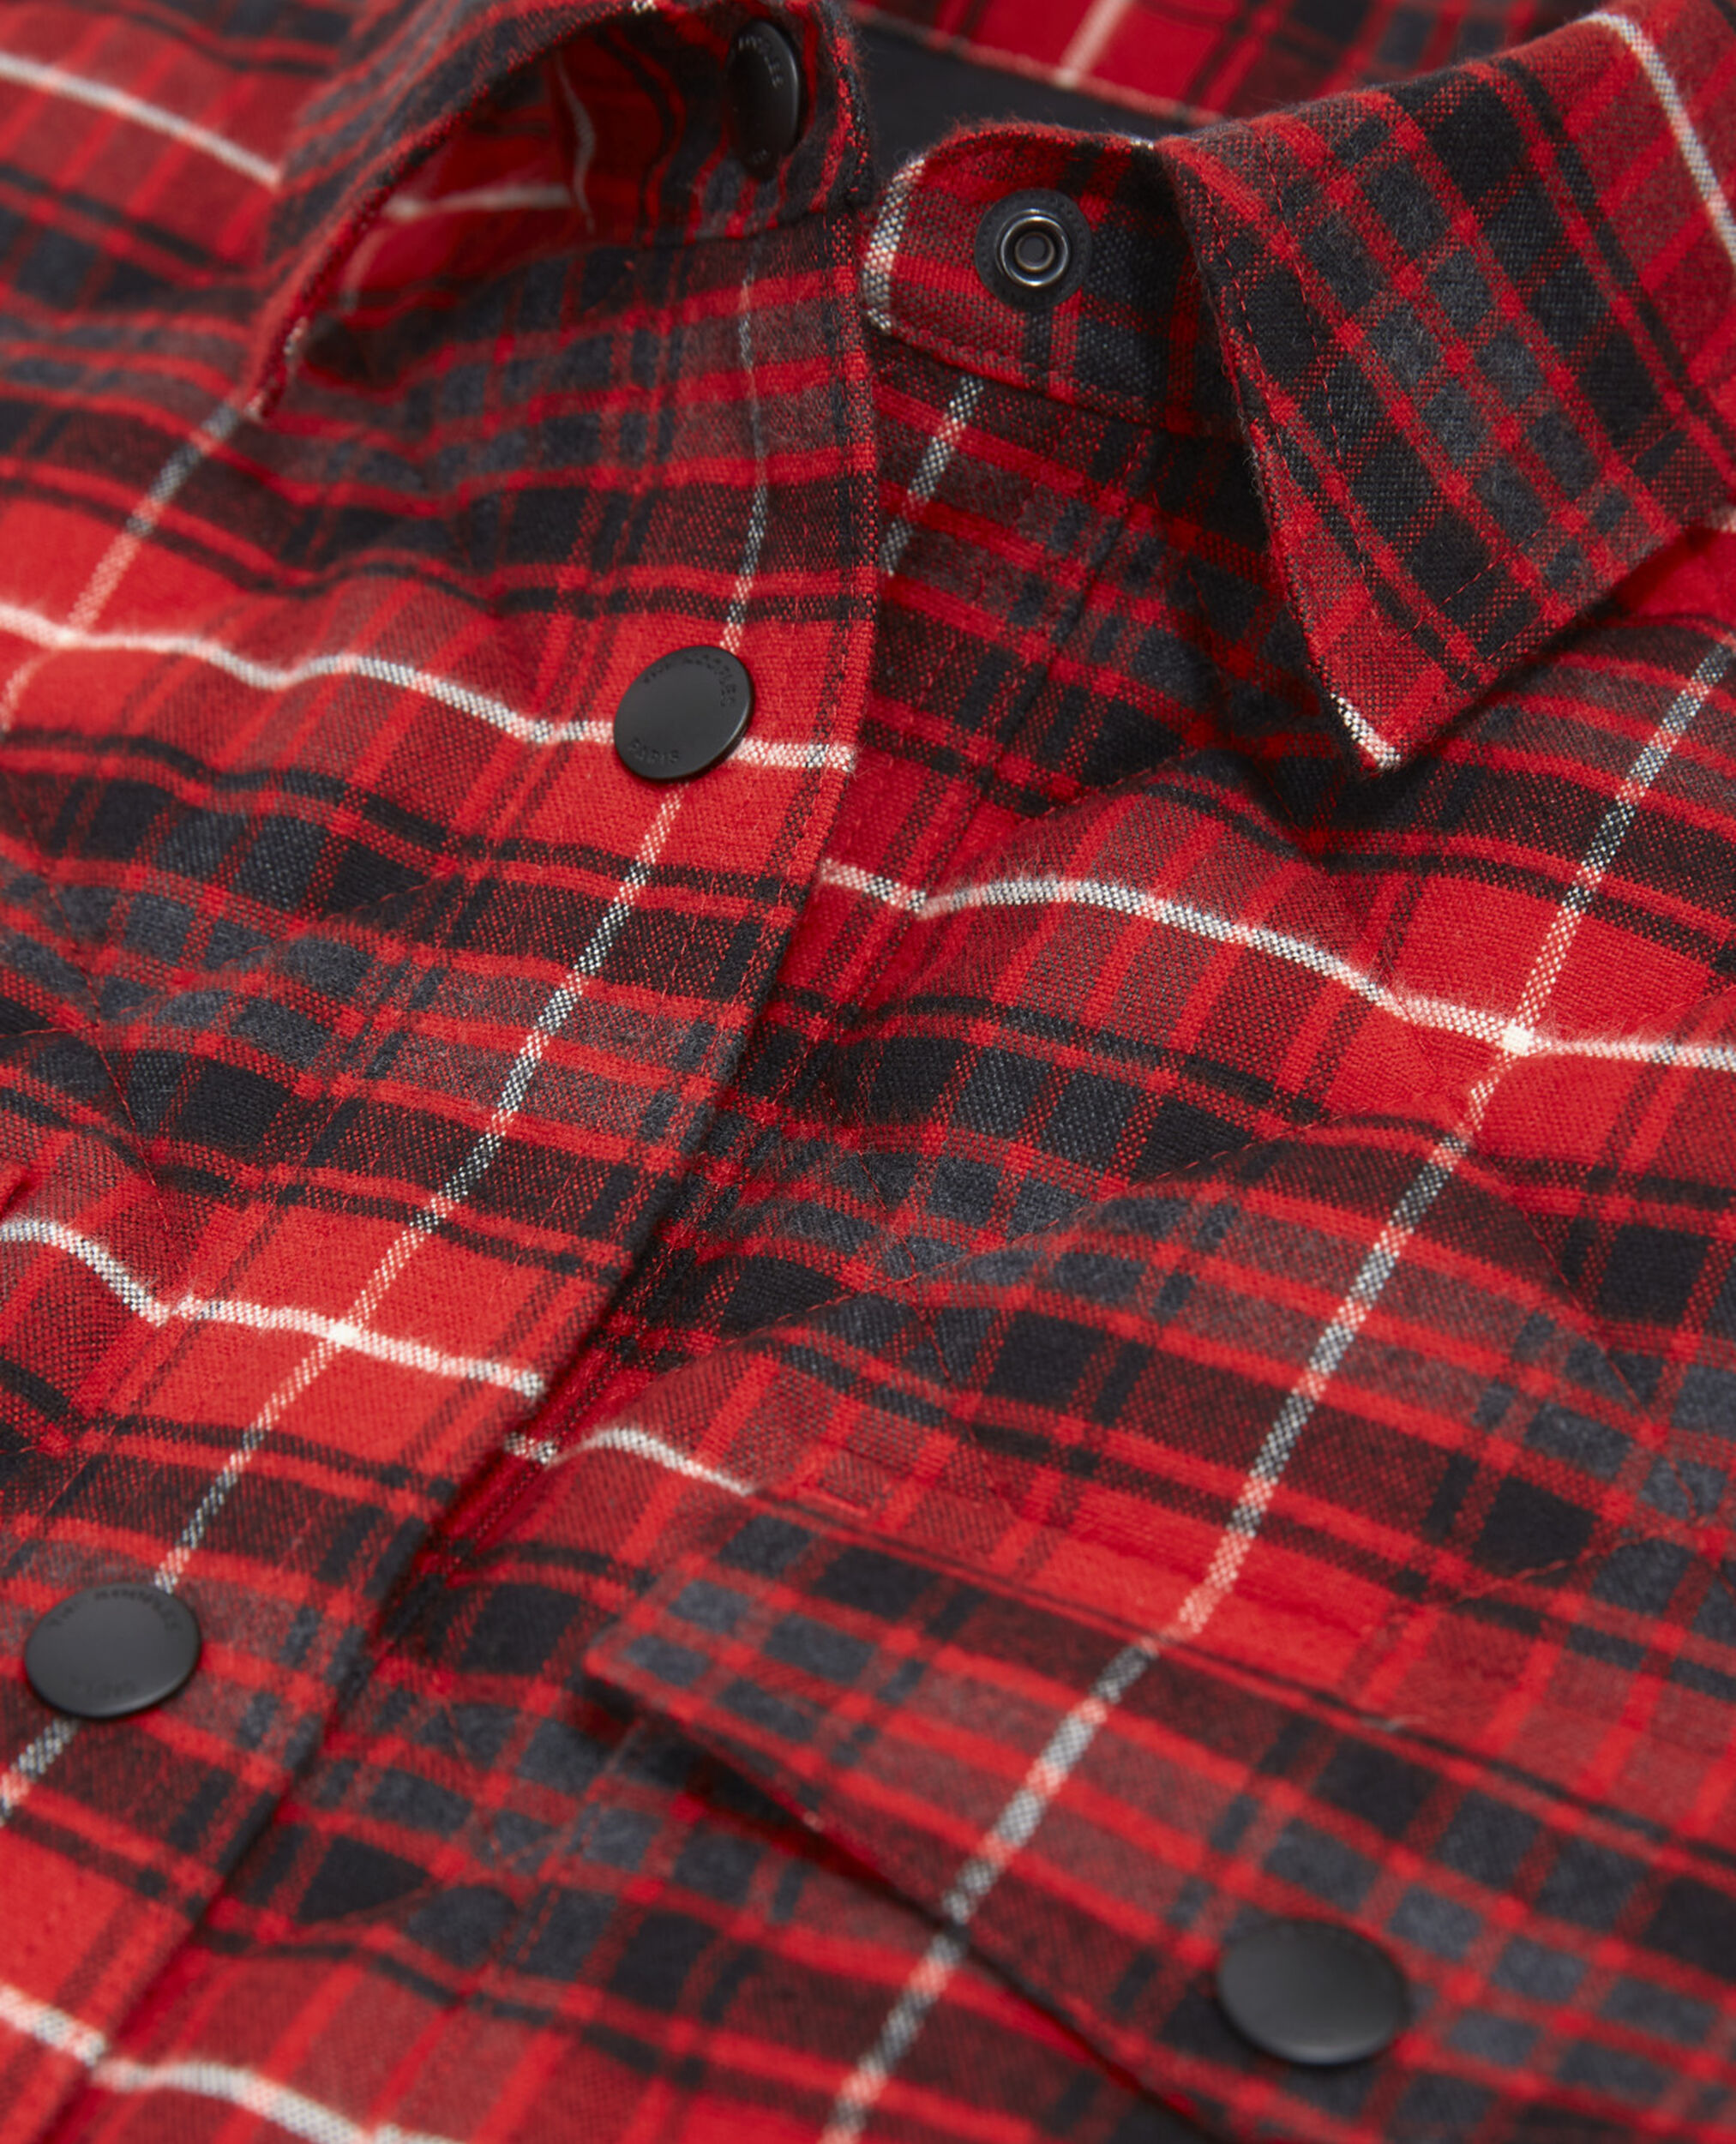 Black and red oversized checked shirt, RED / BLACK, hi-res image number null